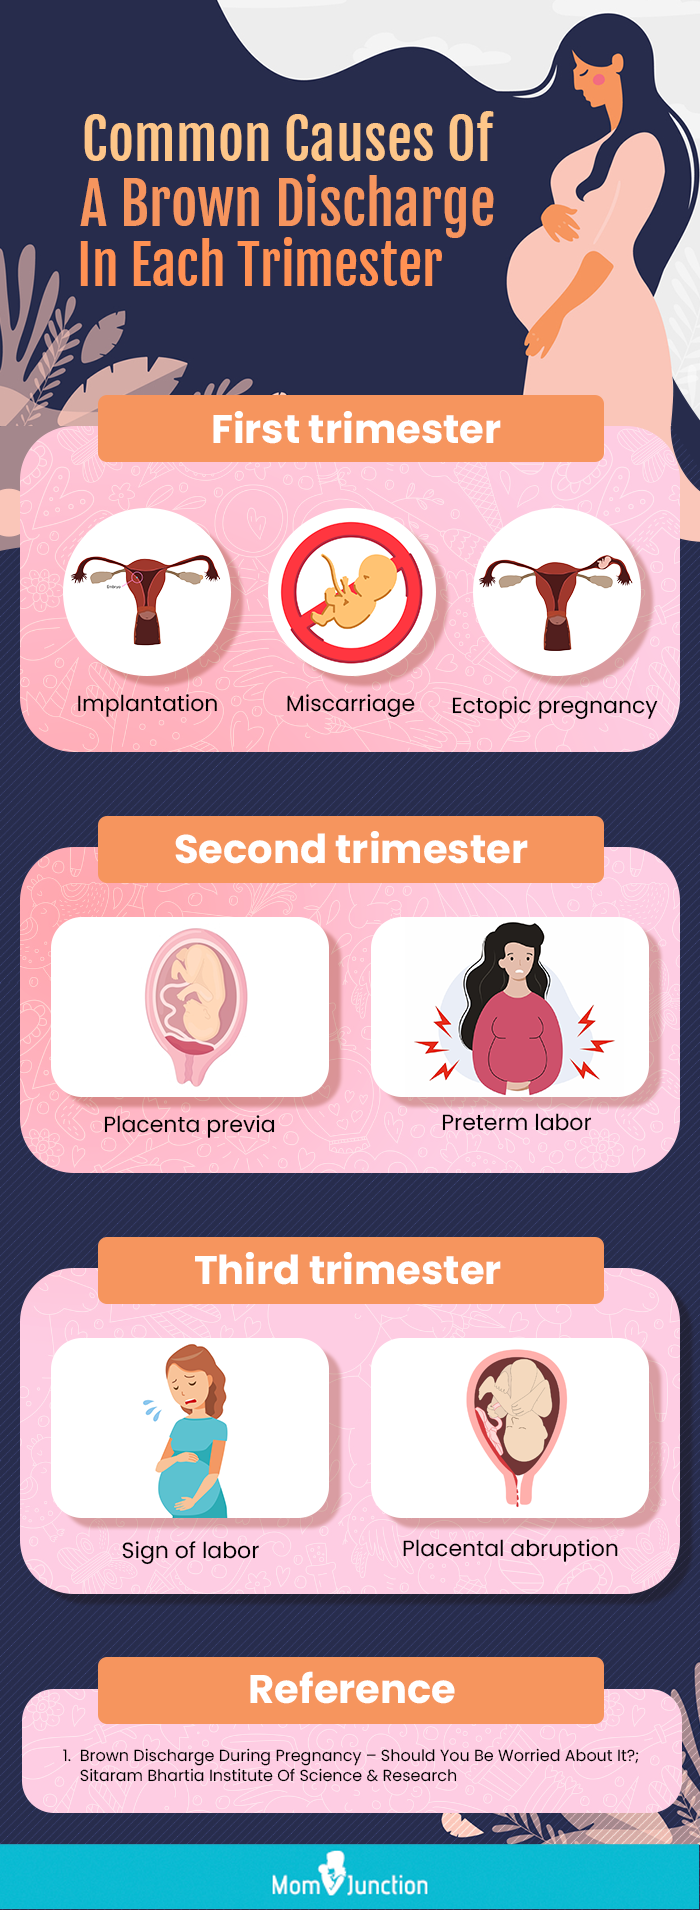 Brown discharge during pregnancy: Is it normal?